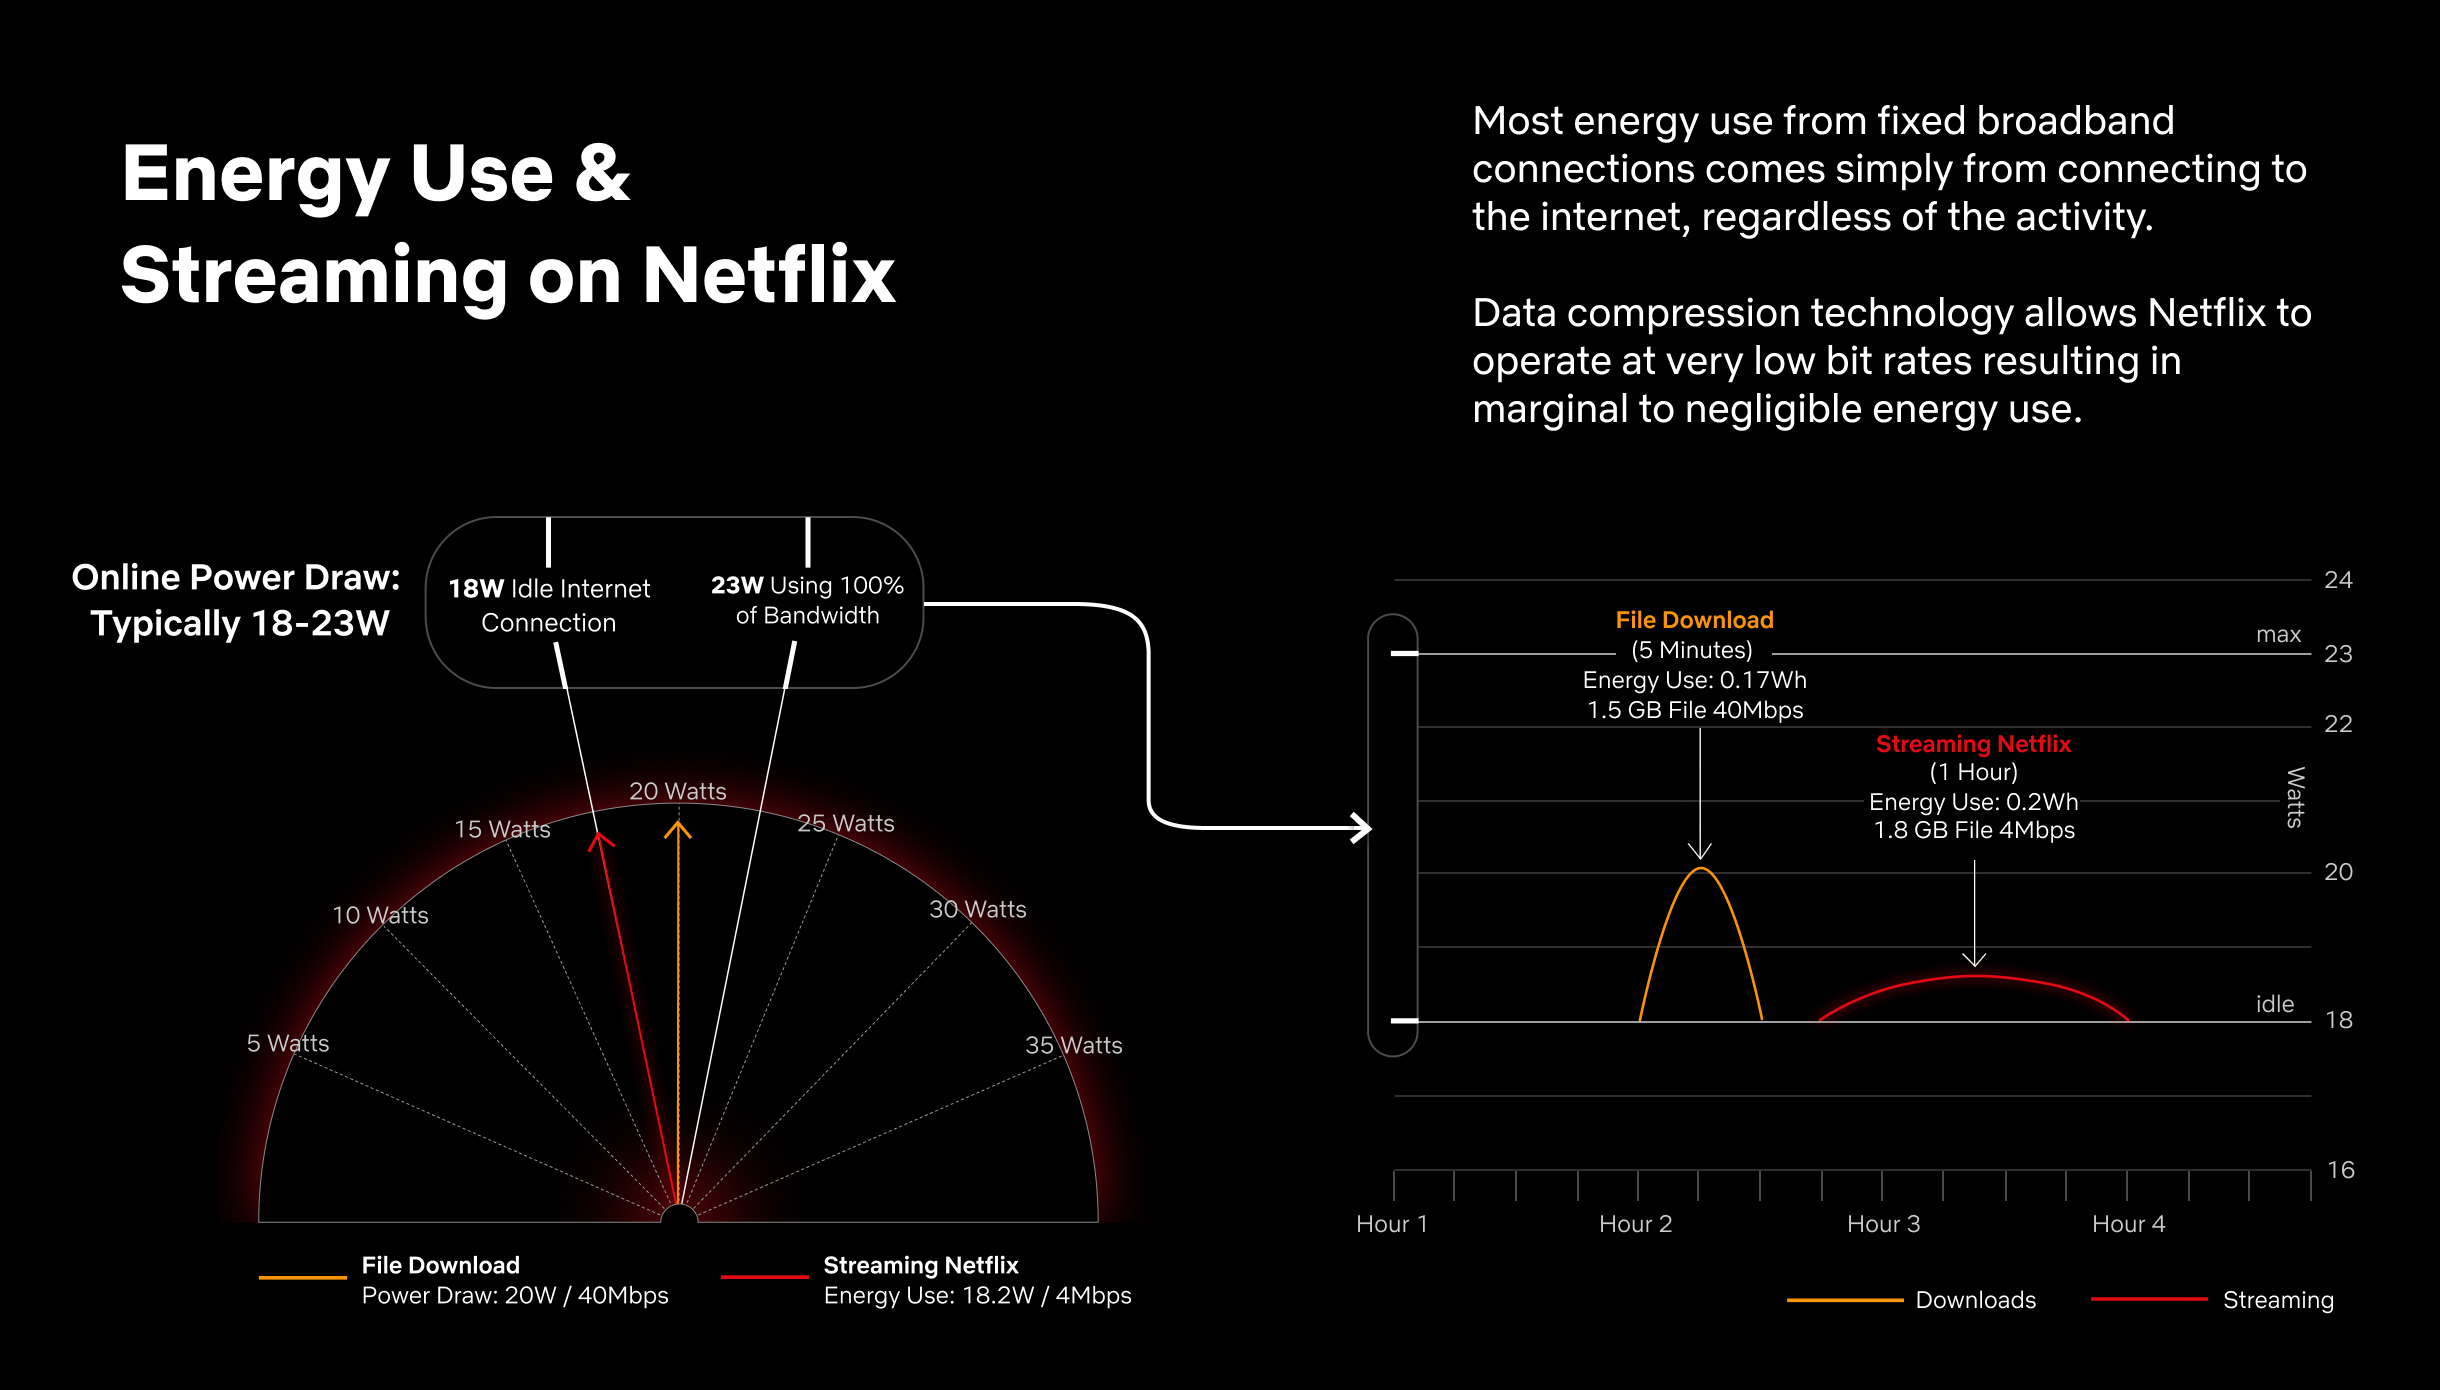 Energy Efficiency in Streaming: Innovation Reaping Rewards - About Netflix